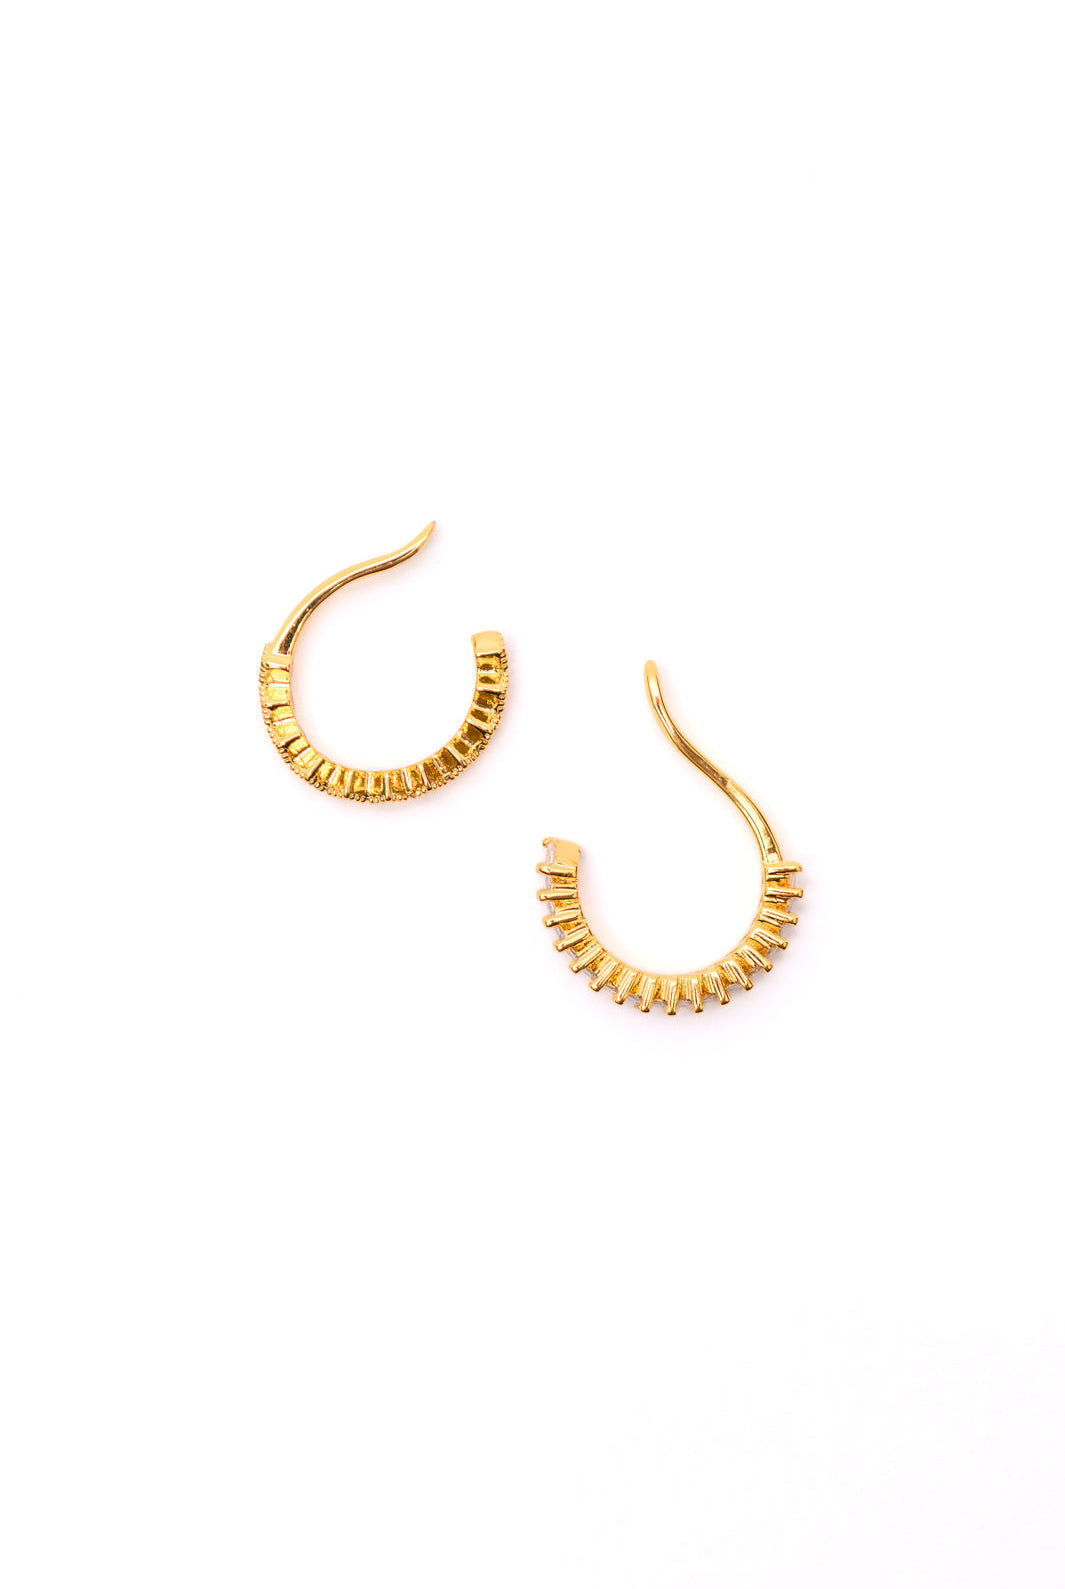 In This Together Gold Ear Cuff Set-Womens-Ave Shops-Urban Threadz Boutique, Women's Fashion Boutique in Saugatuck, MI